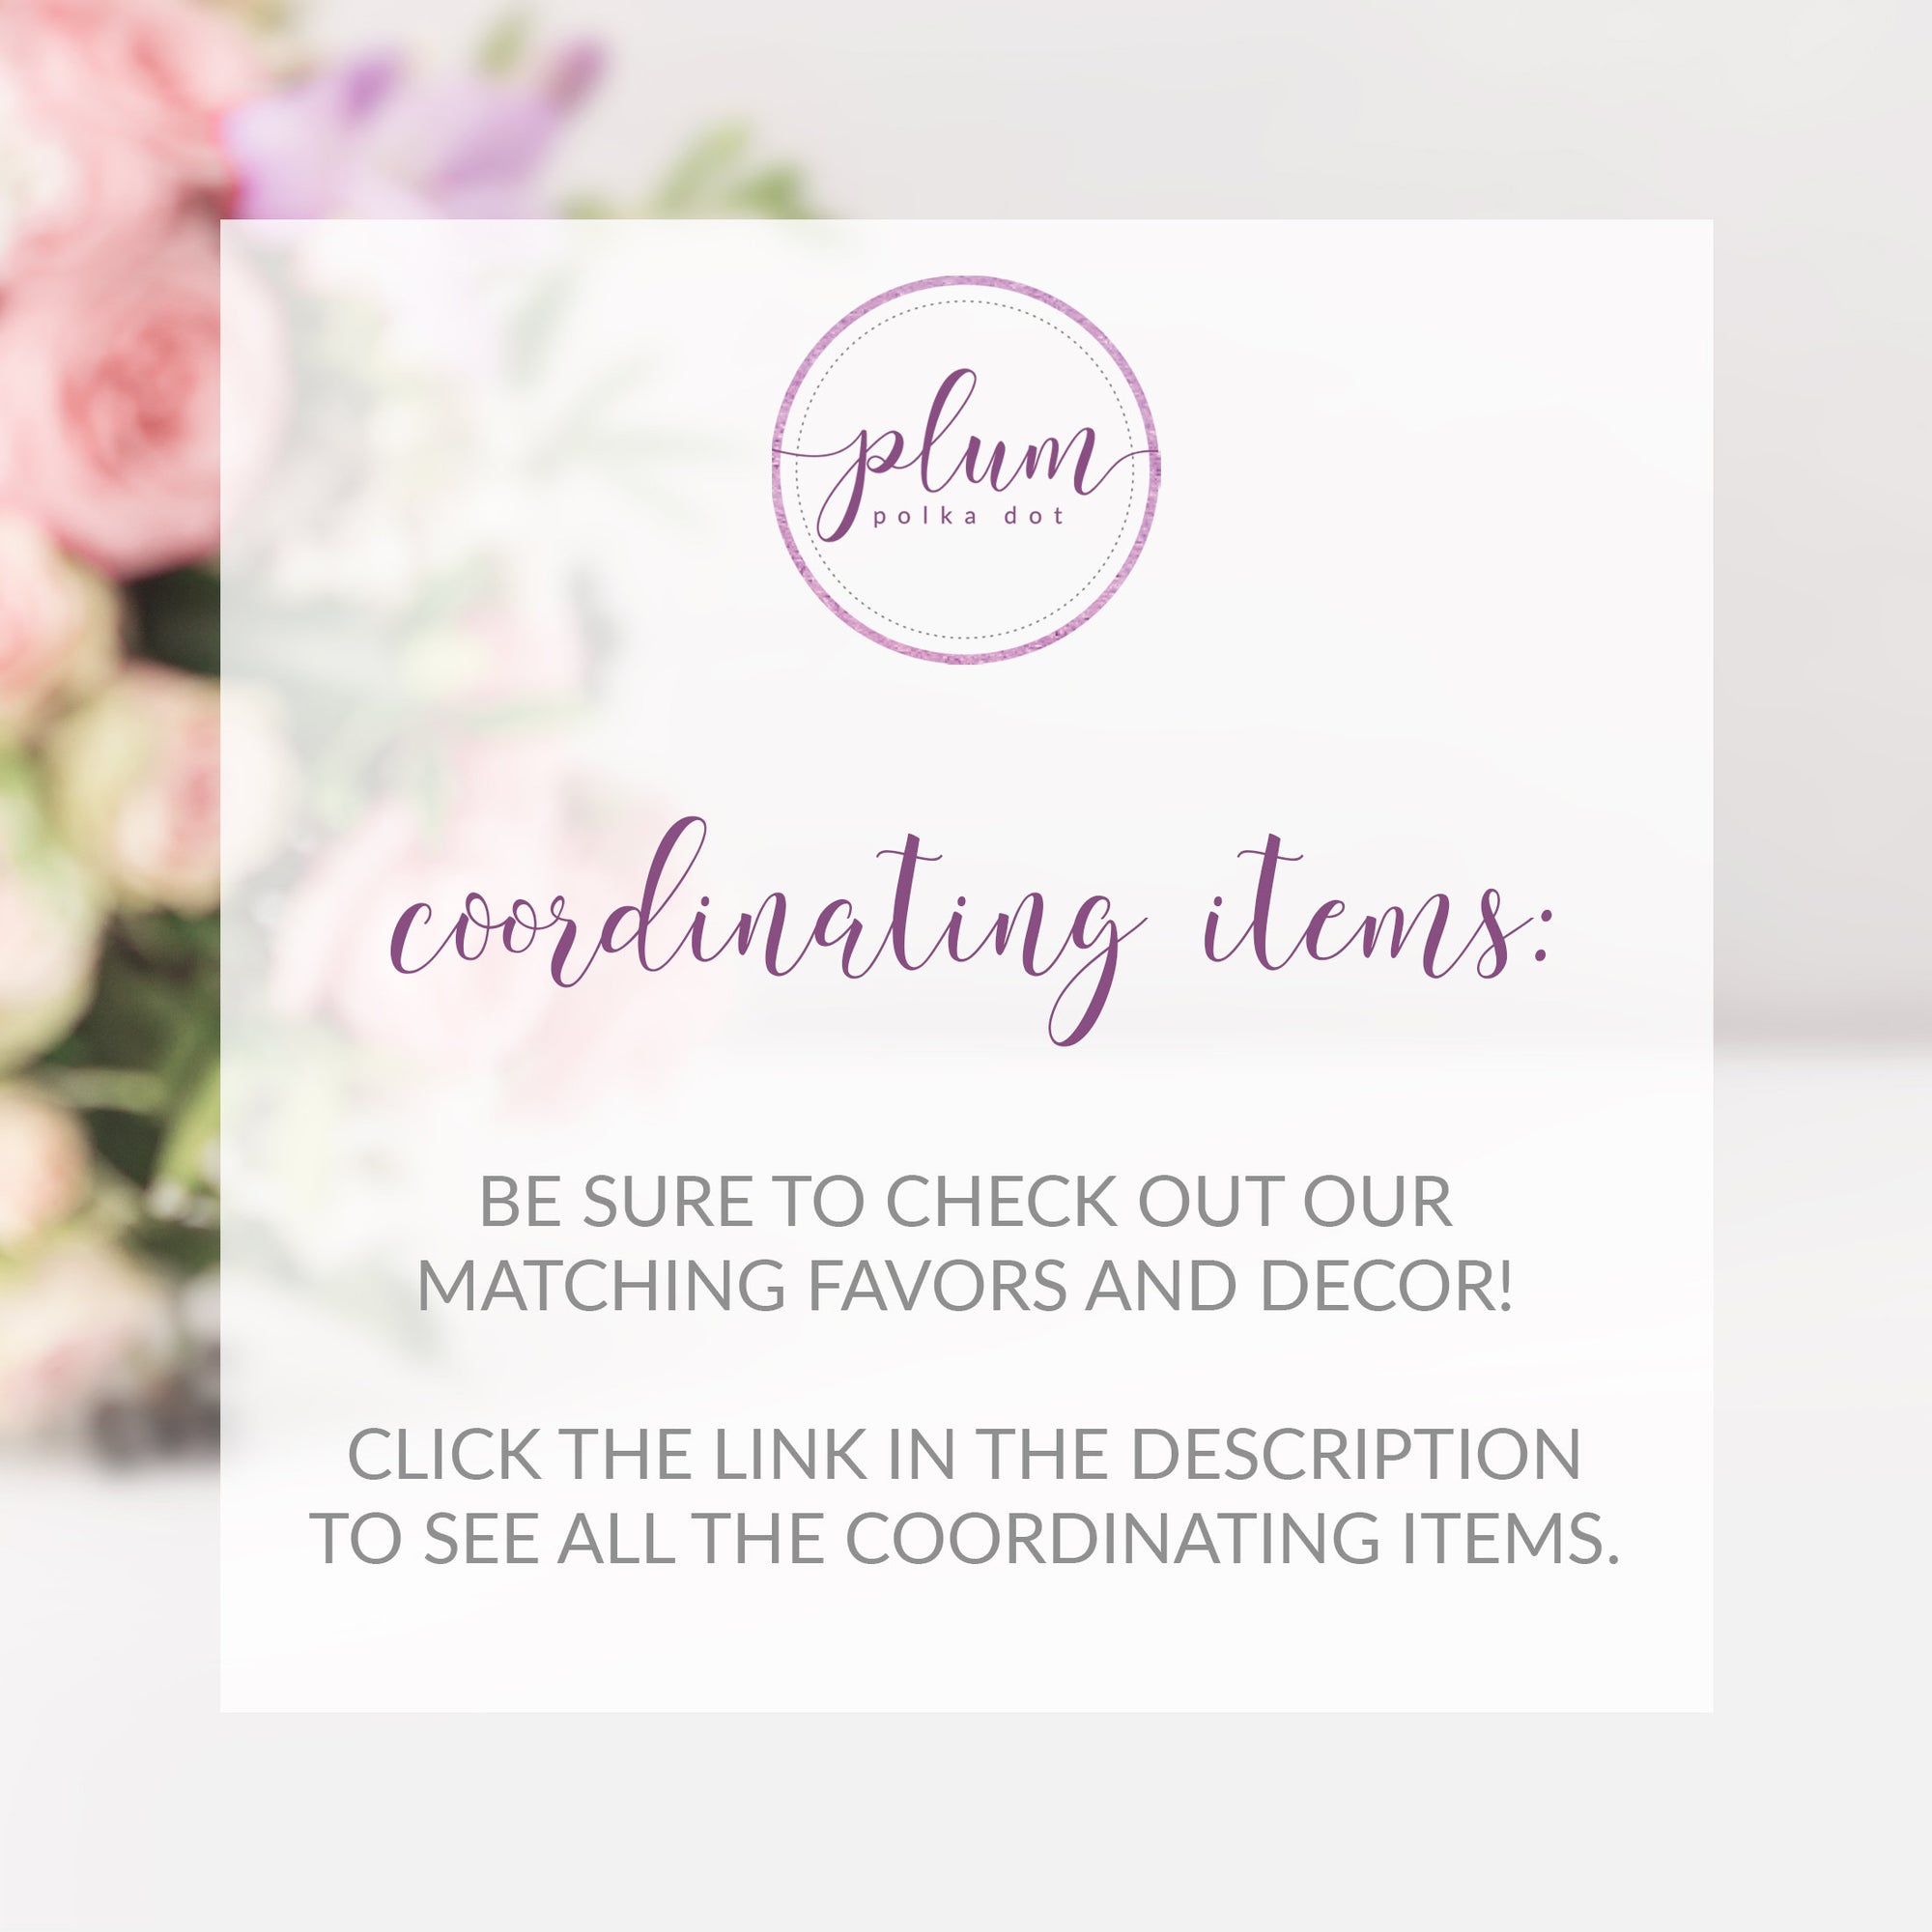 Navy and Blush Floral Favors Sign Printable INSTANT DOWNLOAD, Birthday, Bridal Shower, Baby Shower, Wedding Decorations and Supplies - NB100 - @PlumPolkaDot 